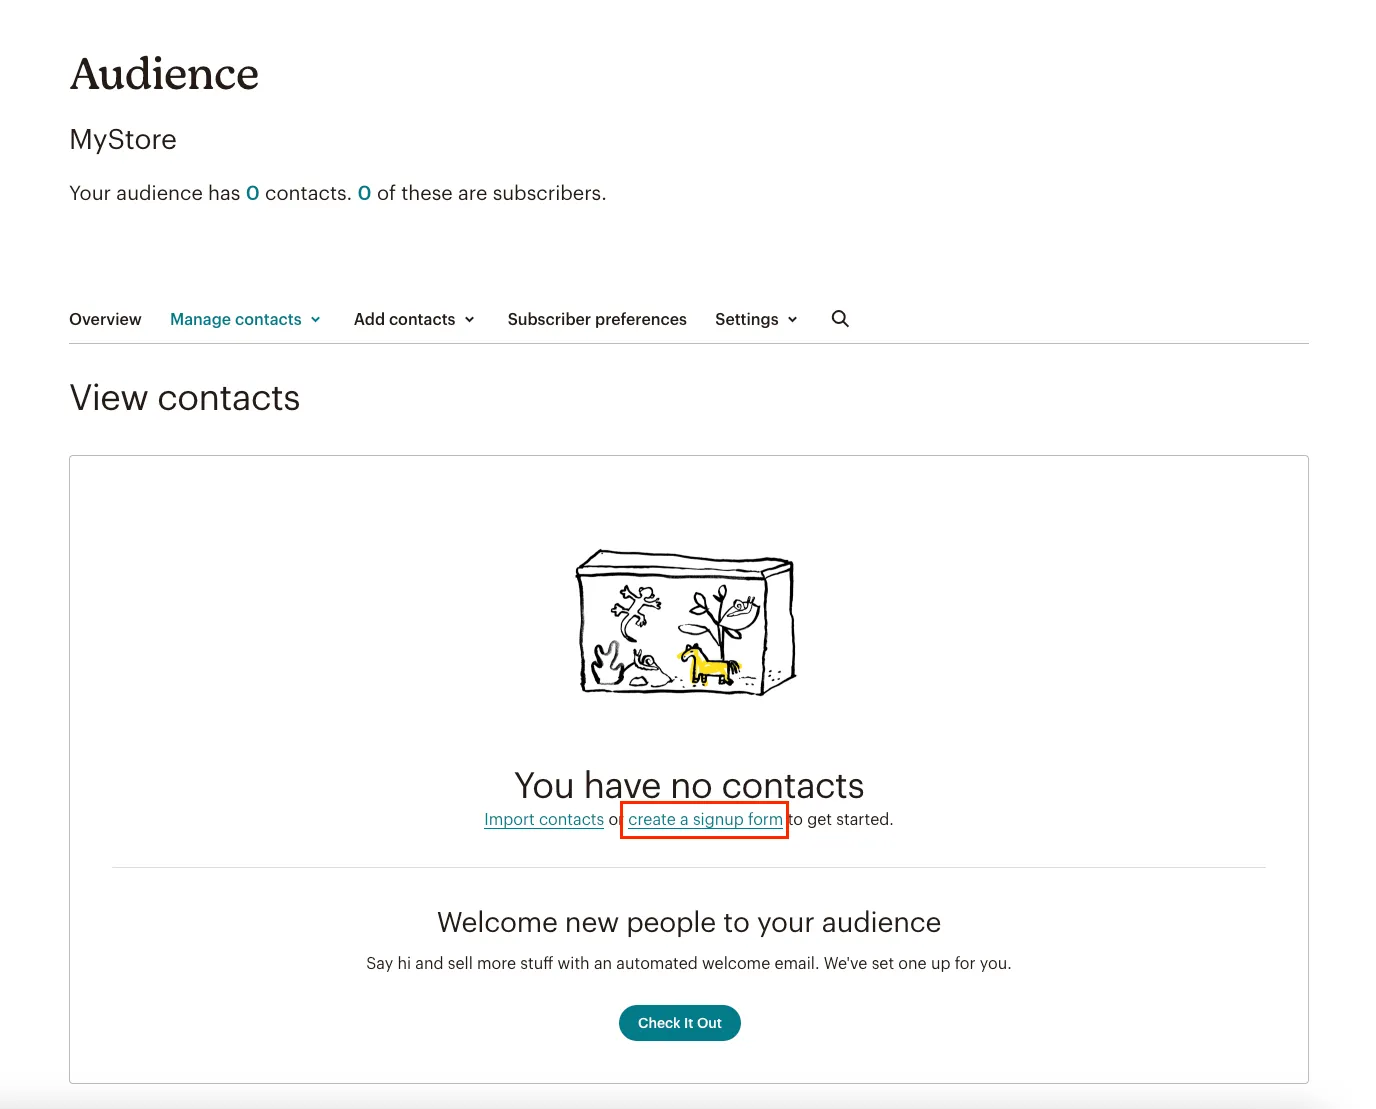 View your Contacts in Mailchimp